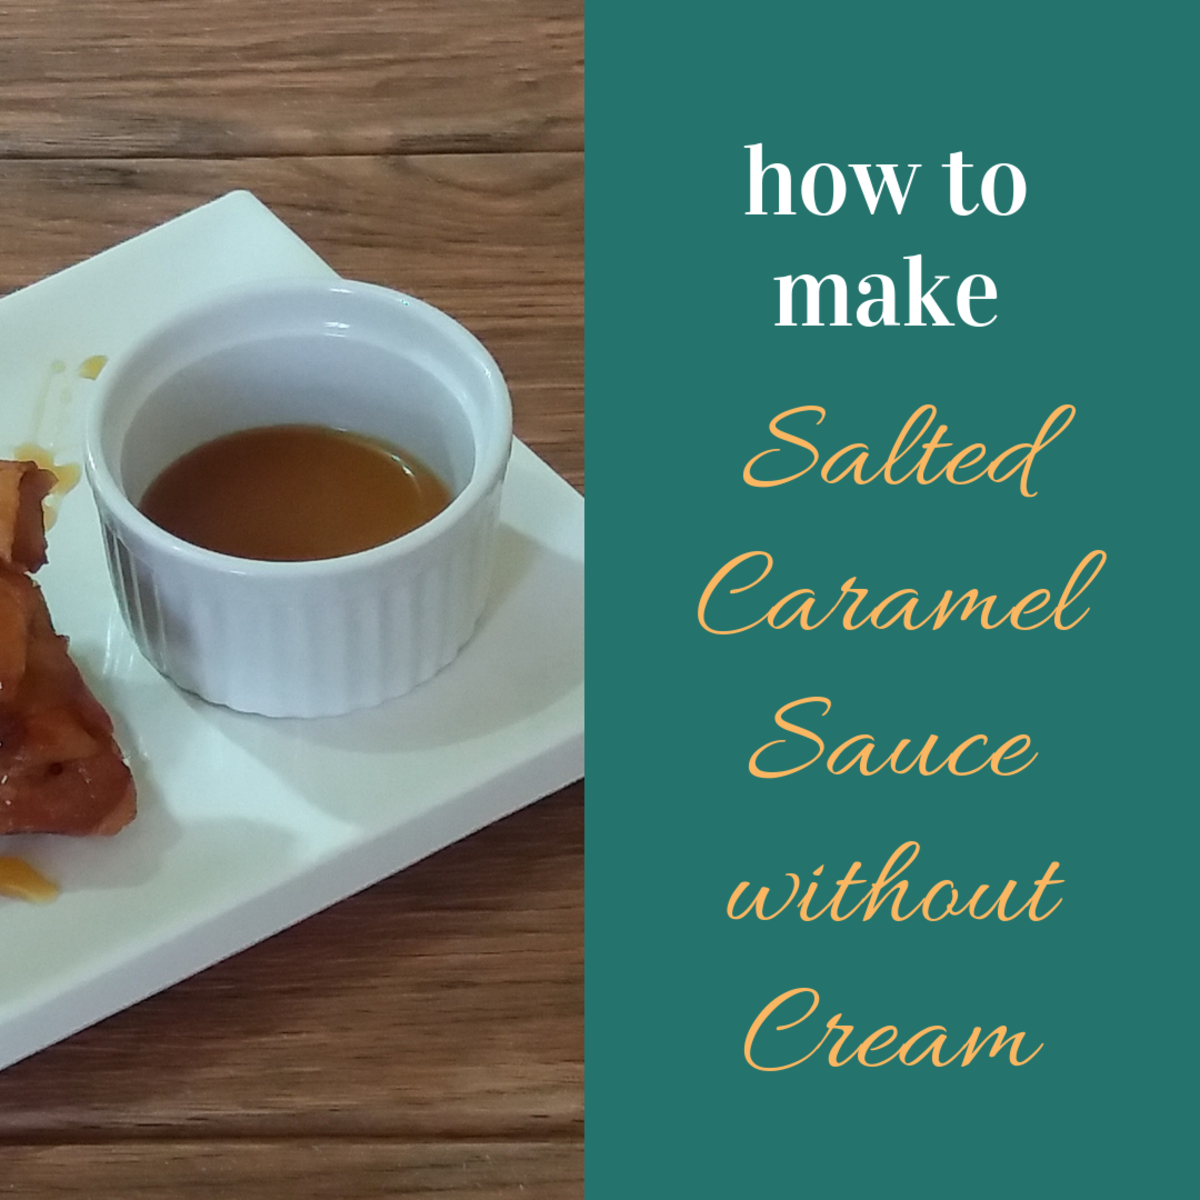 How to Make Salted Caramel Sauce Without Cream